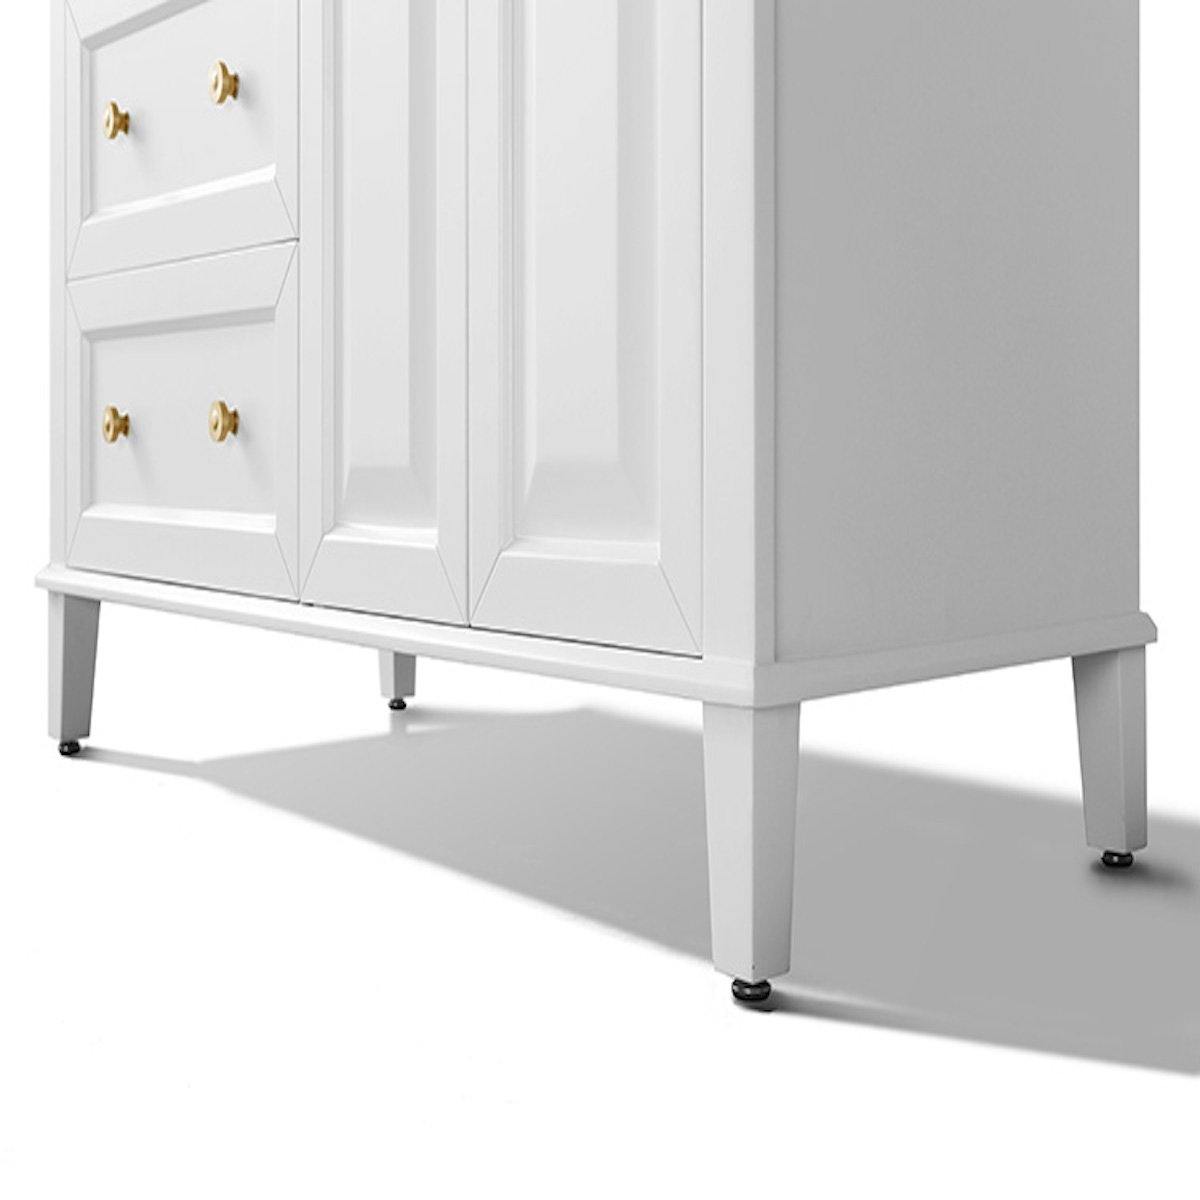 Ancerre Designs Hannah 48 Inch White Single Vanity with Right Basin and Gold Hardware Bottom